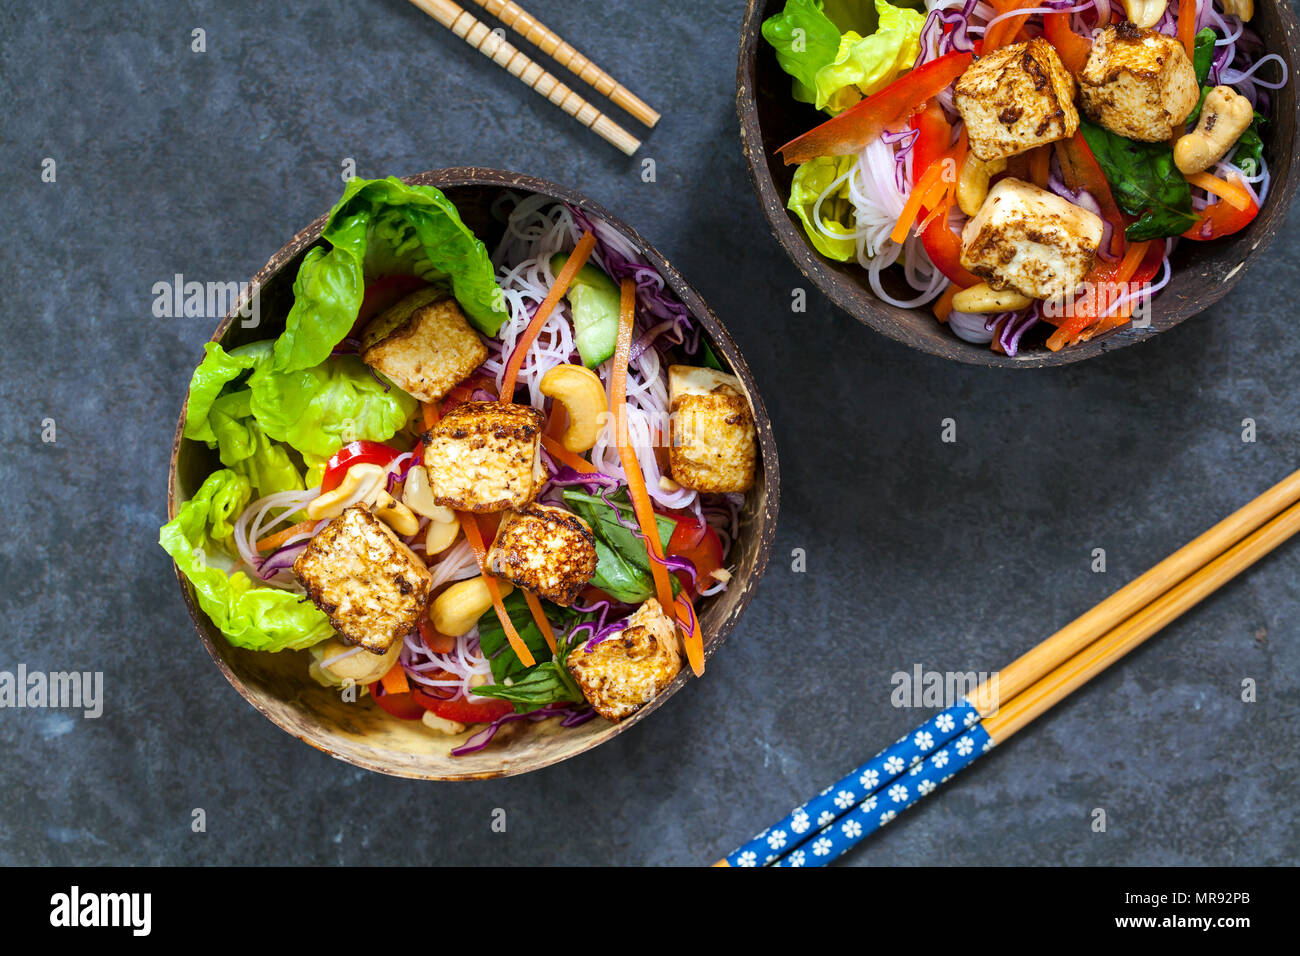 Vietnamese style salad with tofu and vermicelli noodles Stock Photo